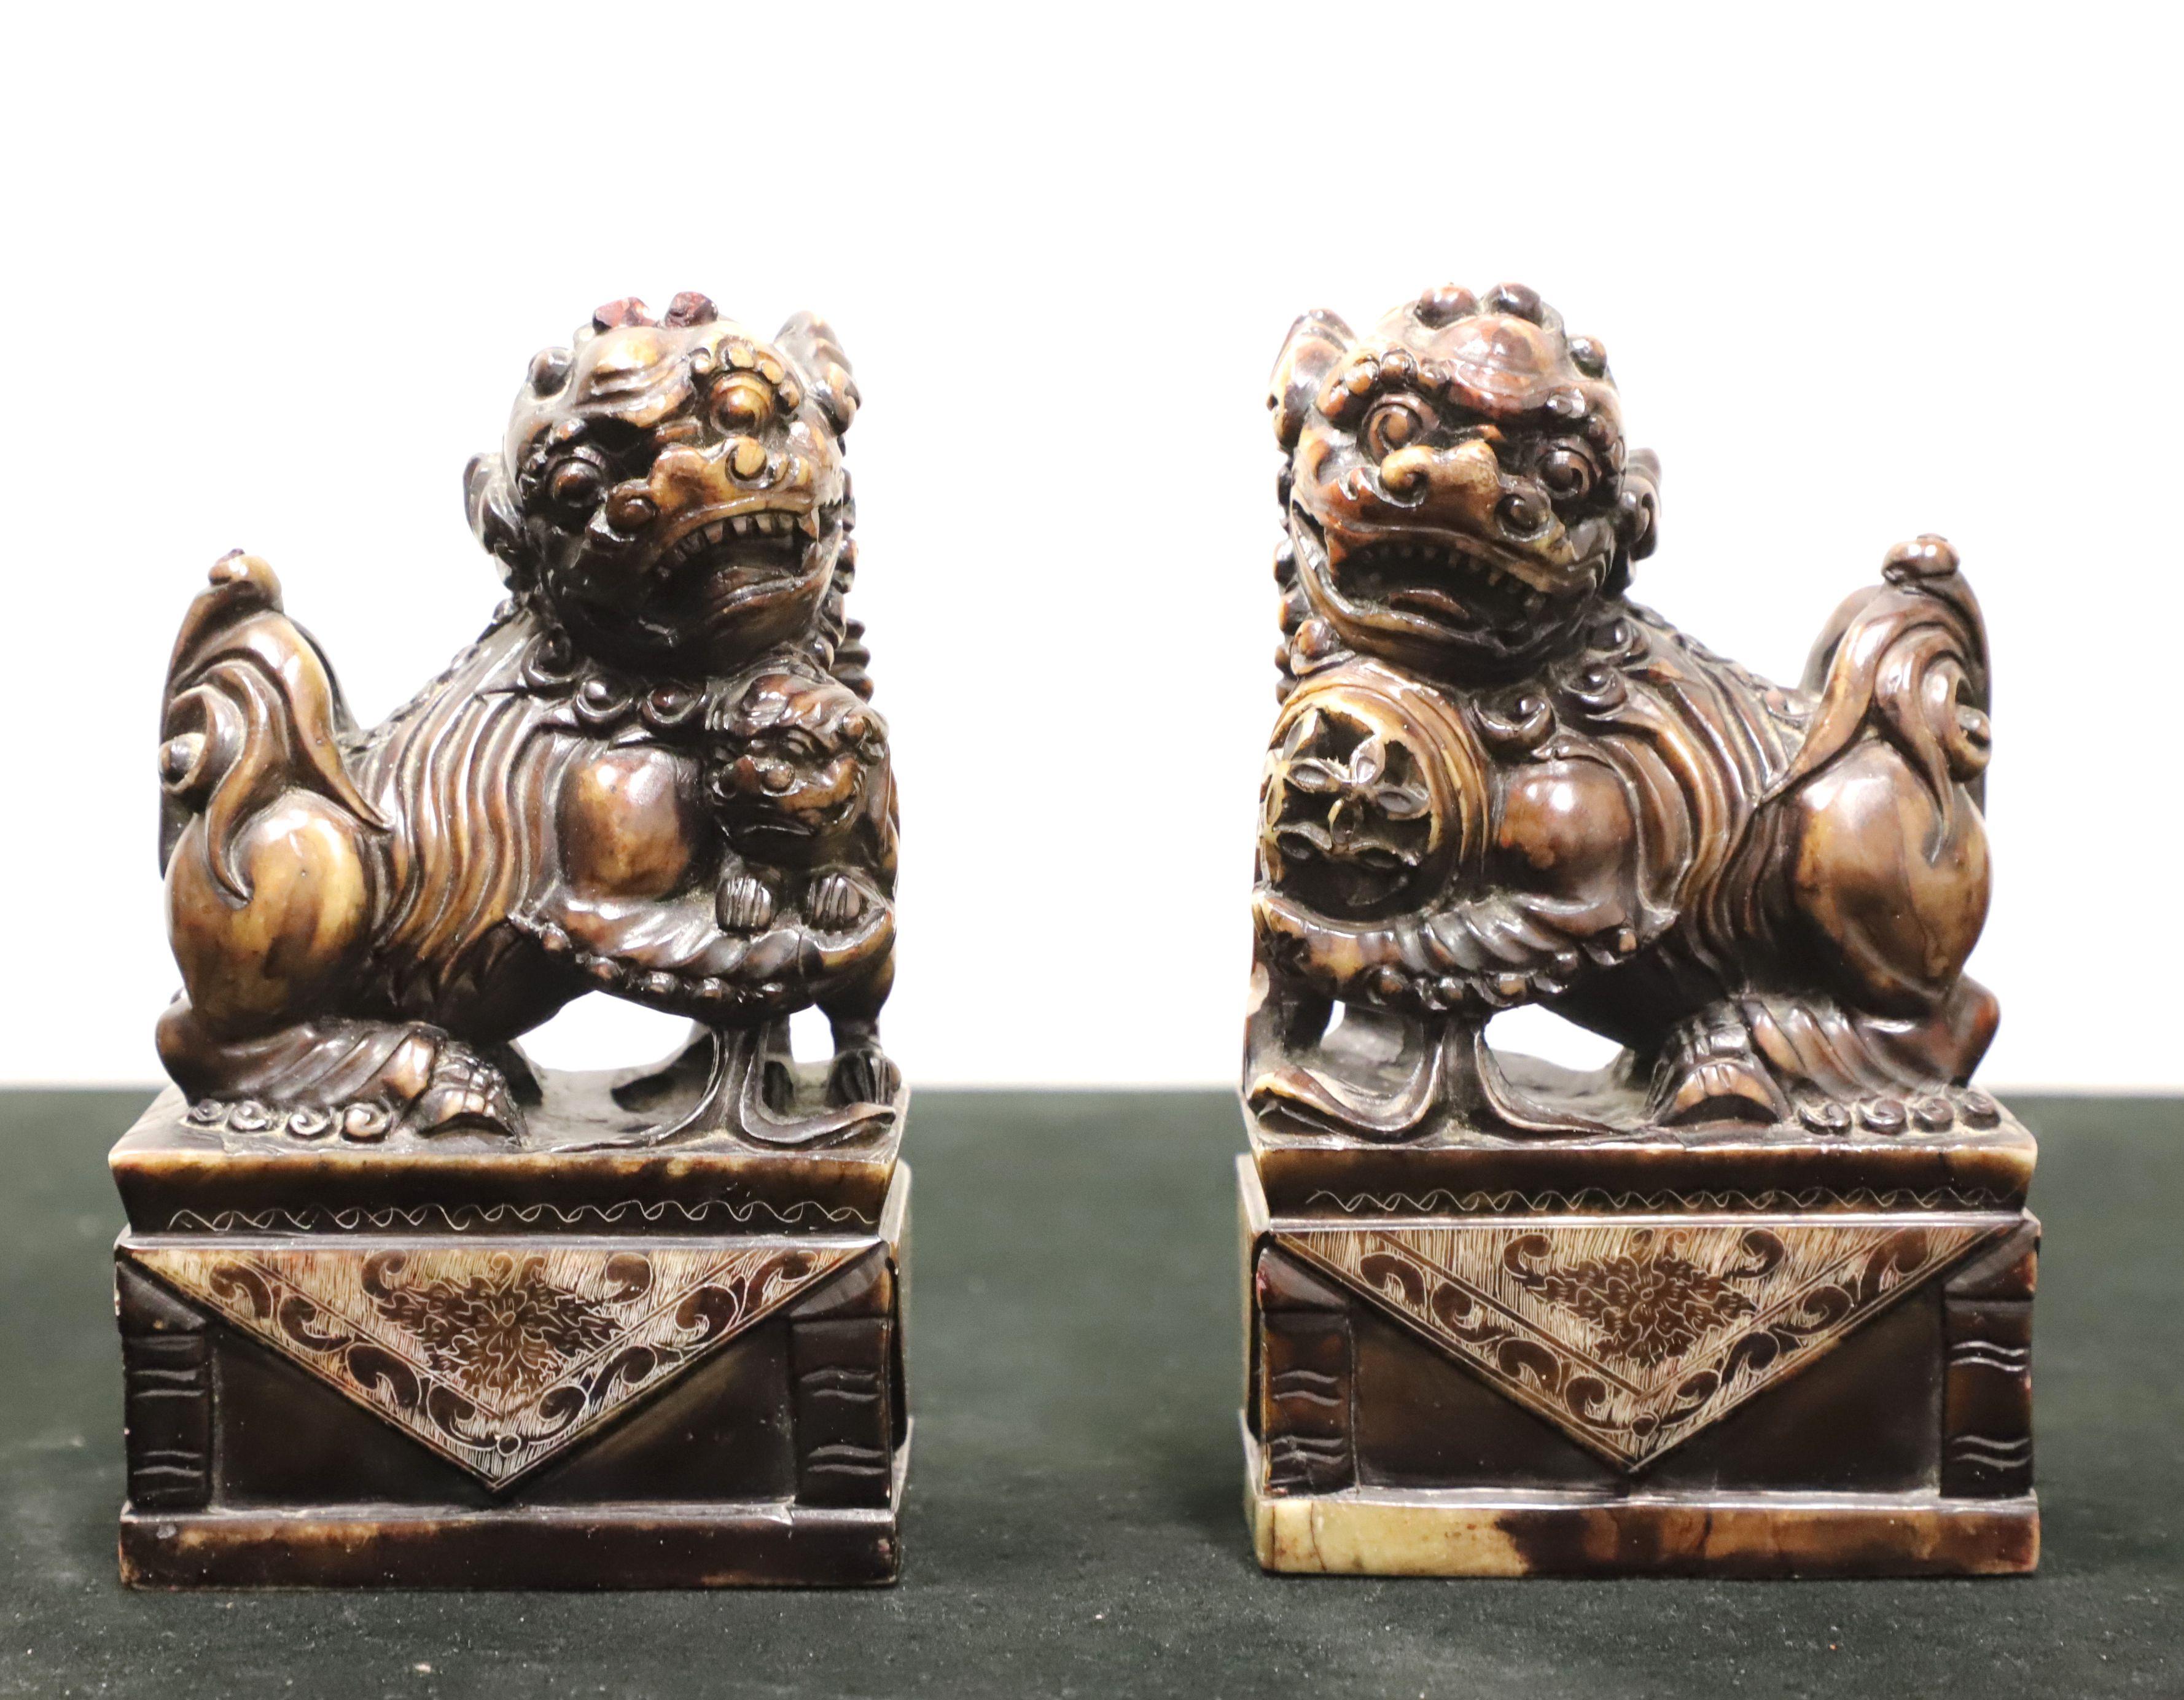 A pair of Foo Dog sculptures in soapstone depicting mythical lion-like animals that are protectors, 